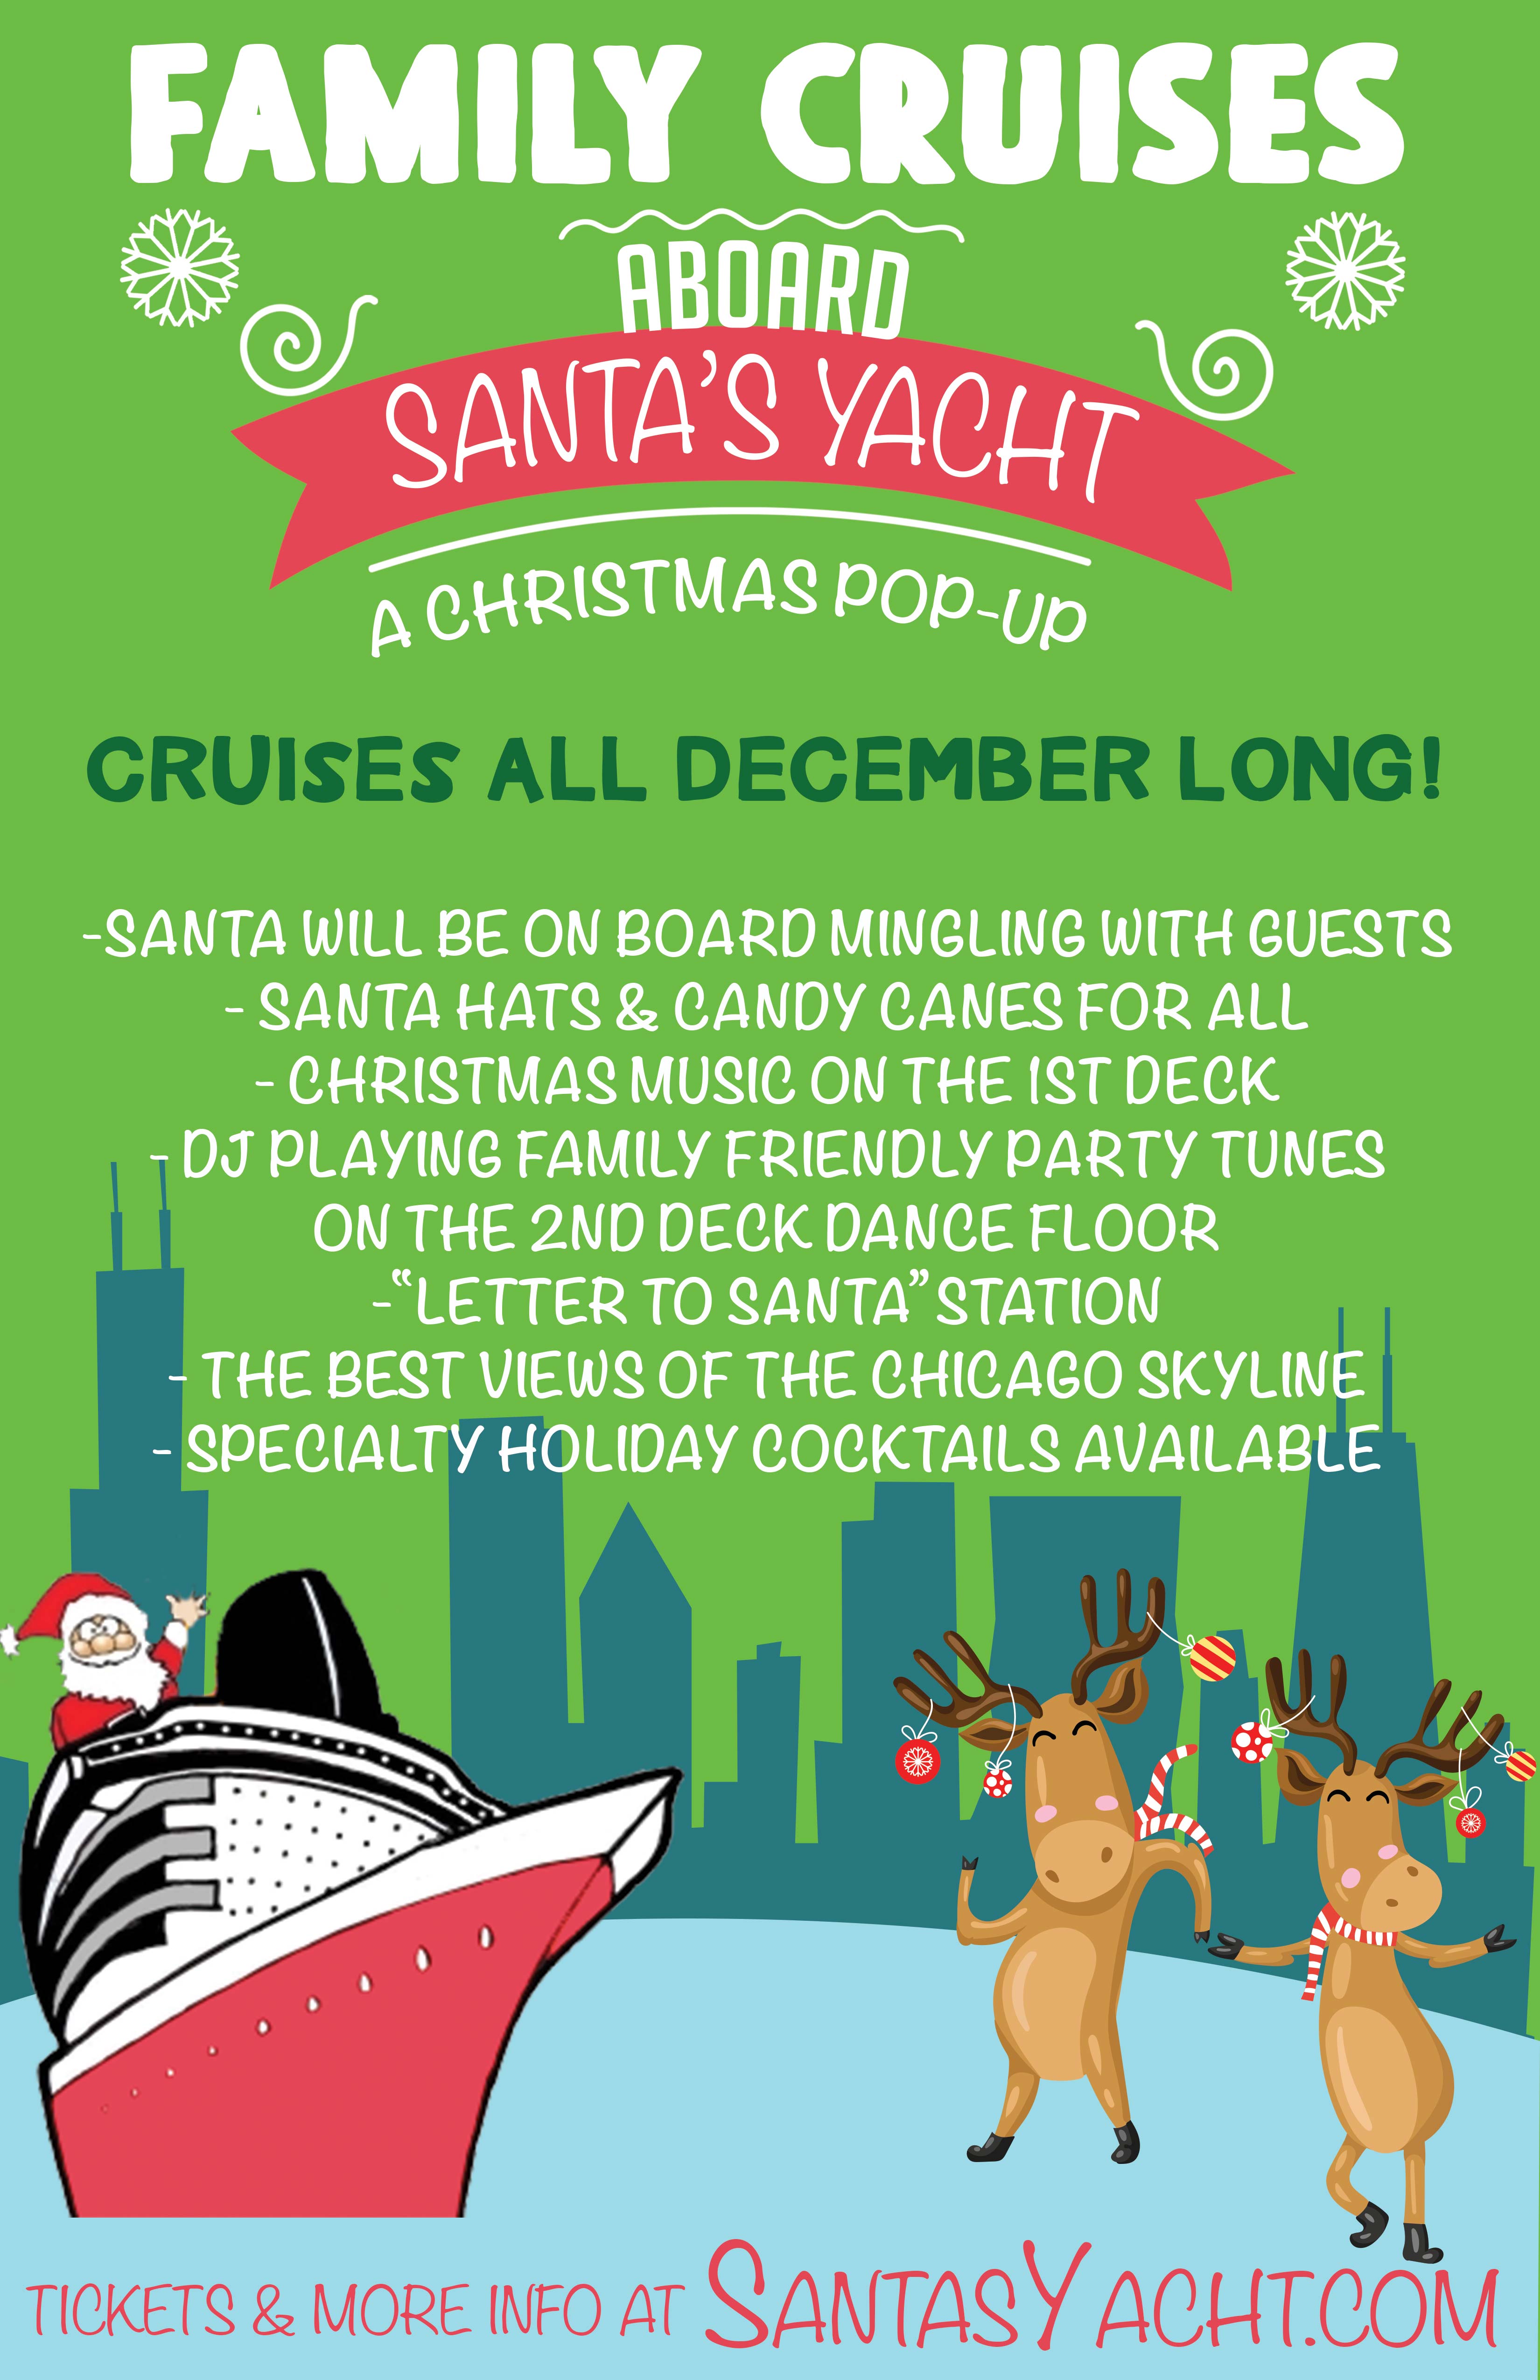 Family Christmas Cruise Party on Lake Michigan - Tickets Include a Live DJ, Candy Canes and Santa Hats for All